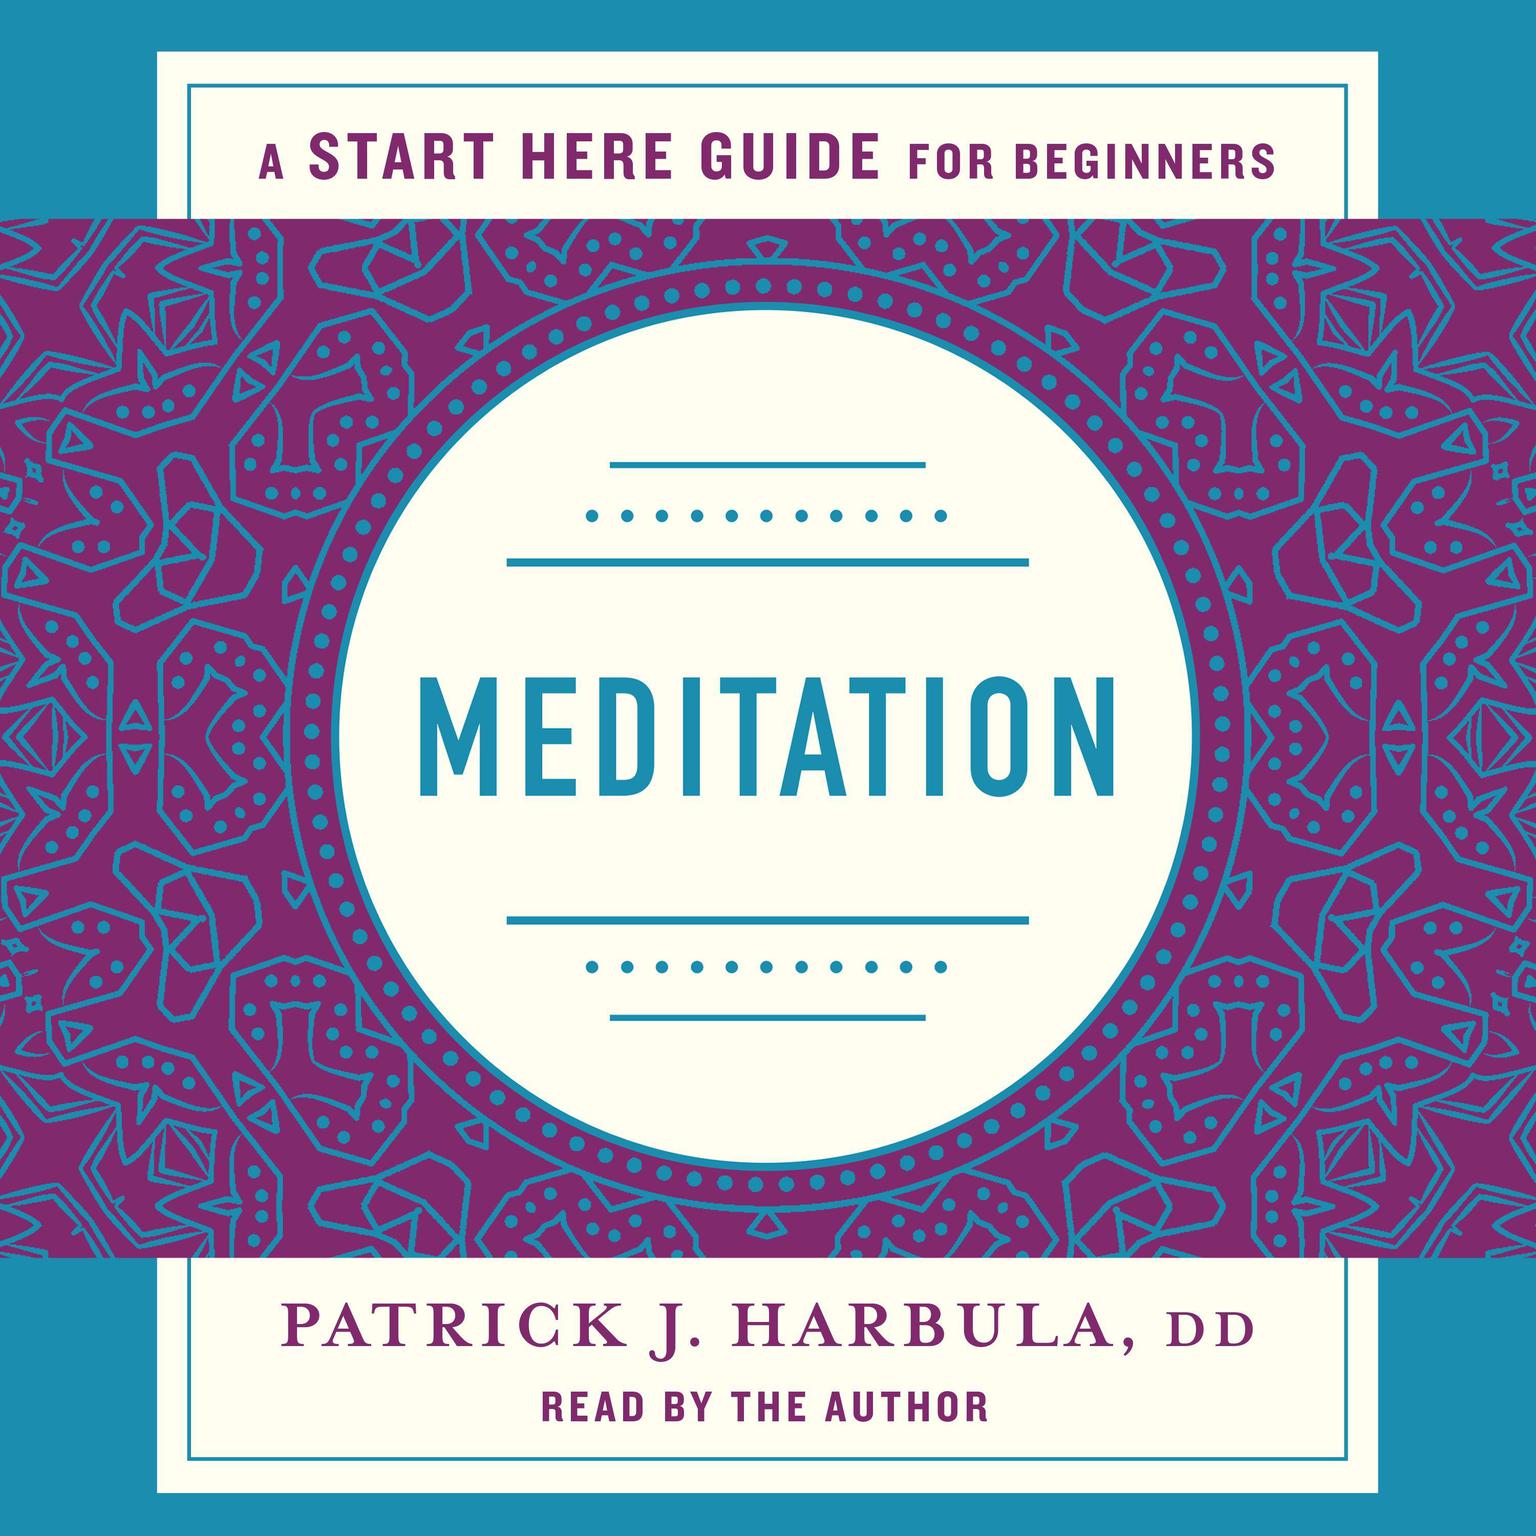 Meditation: The Simple and Practical Way to Begin Meditating (A Start Here Guide) Audiobook, by Rev. Patrick J. Harbula